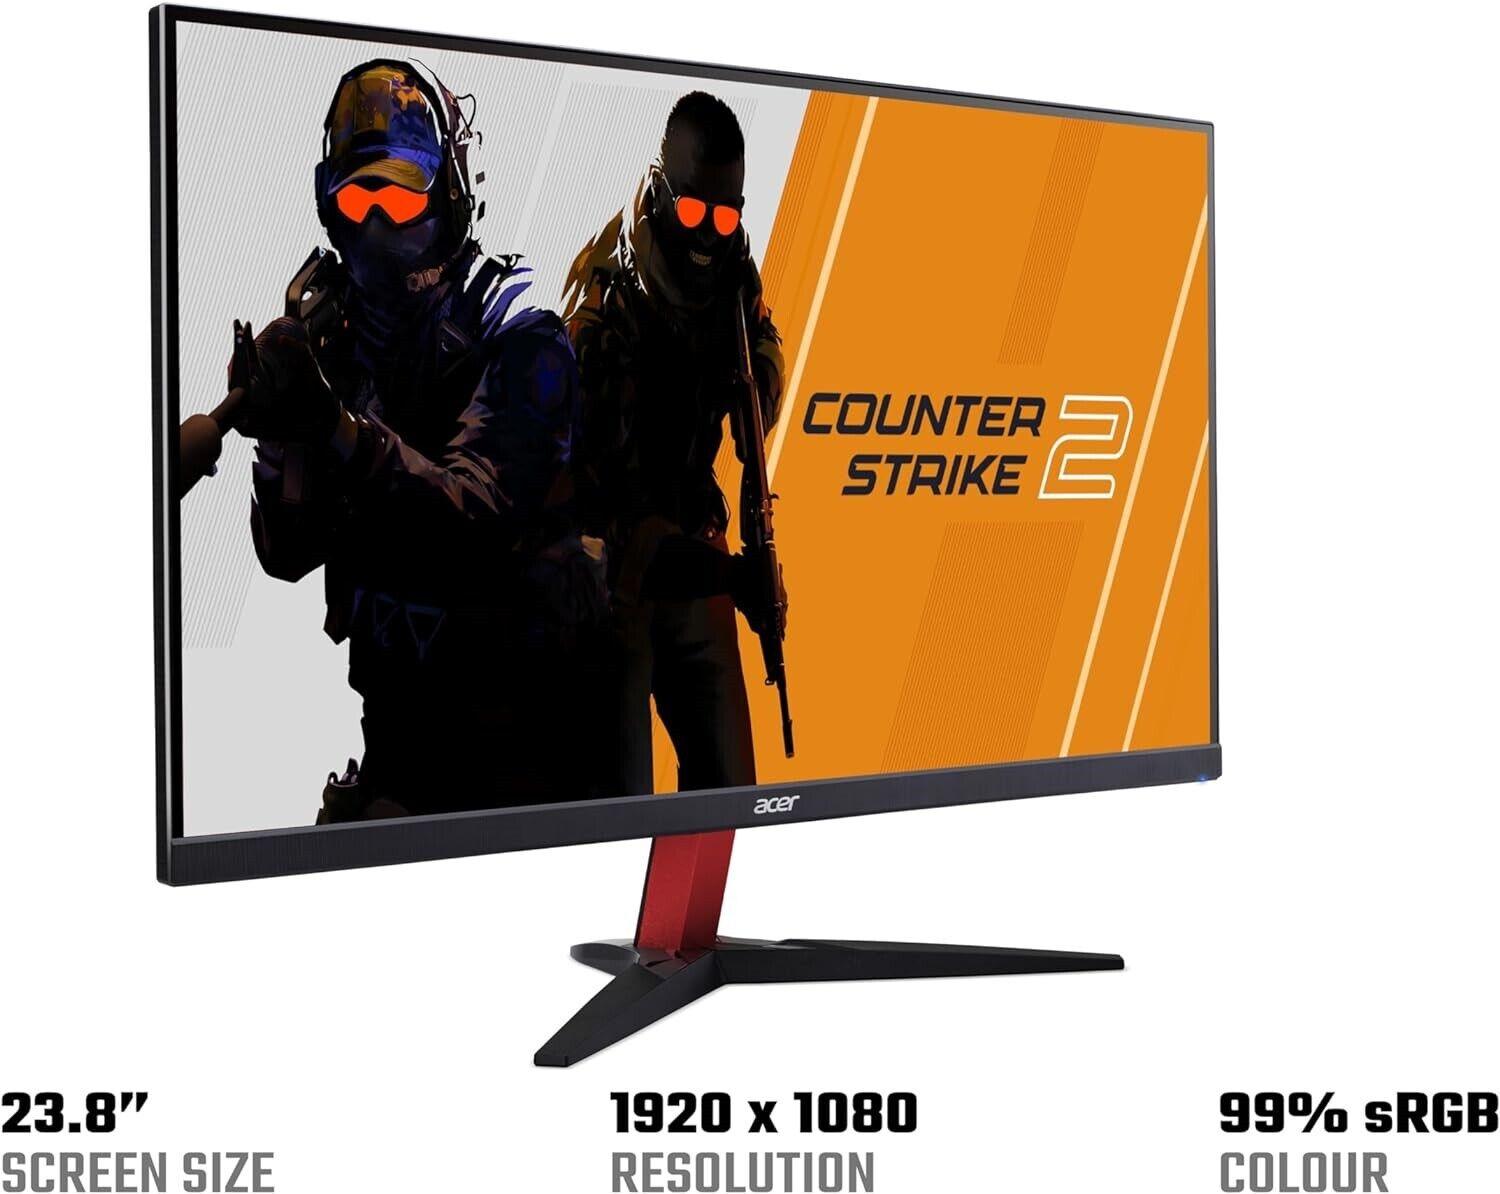 Acer Nitro KG242YE 23.8 Inch 100Hz IPS FHD Gaming Monitor NO STAND - Smart Clear Vision